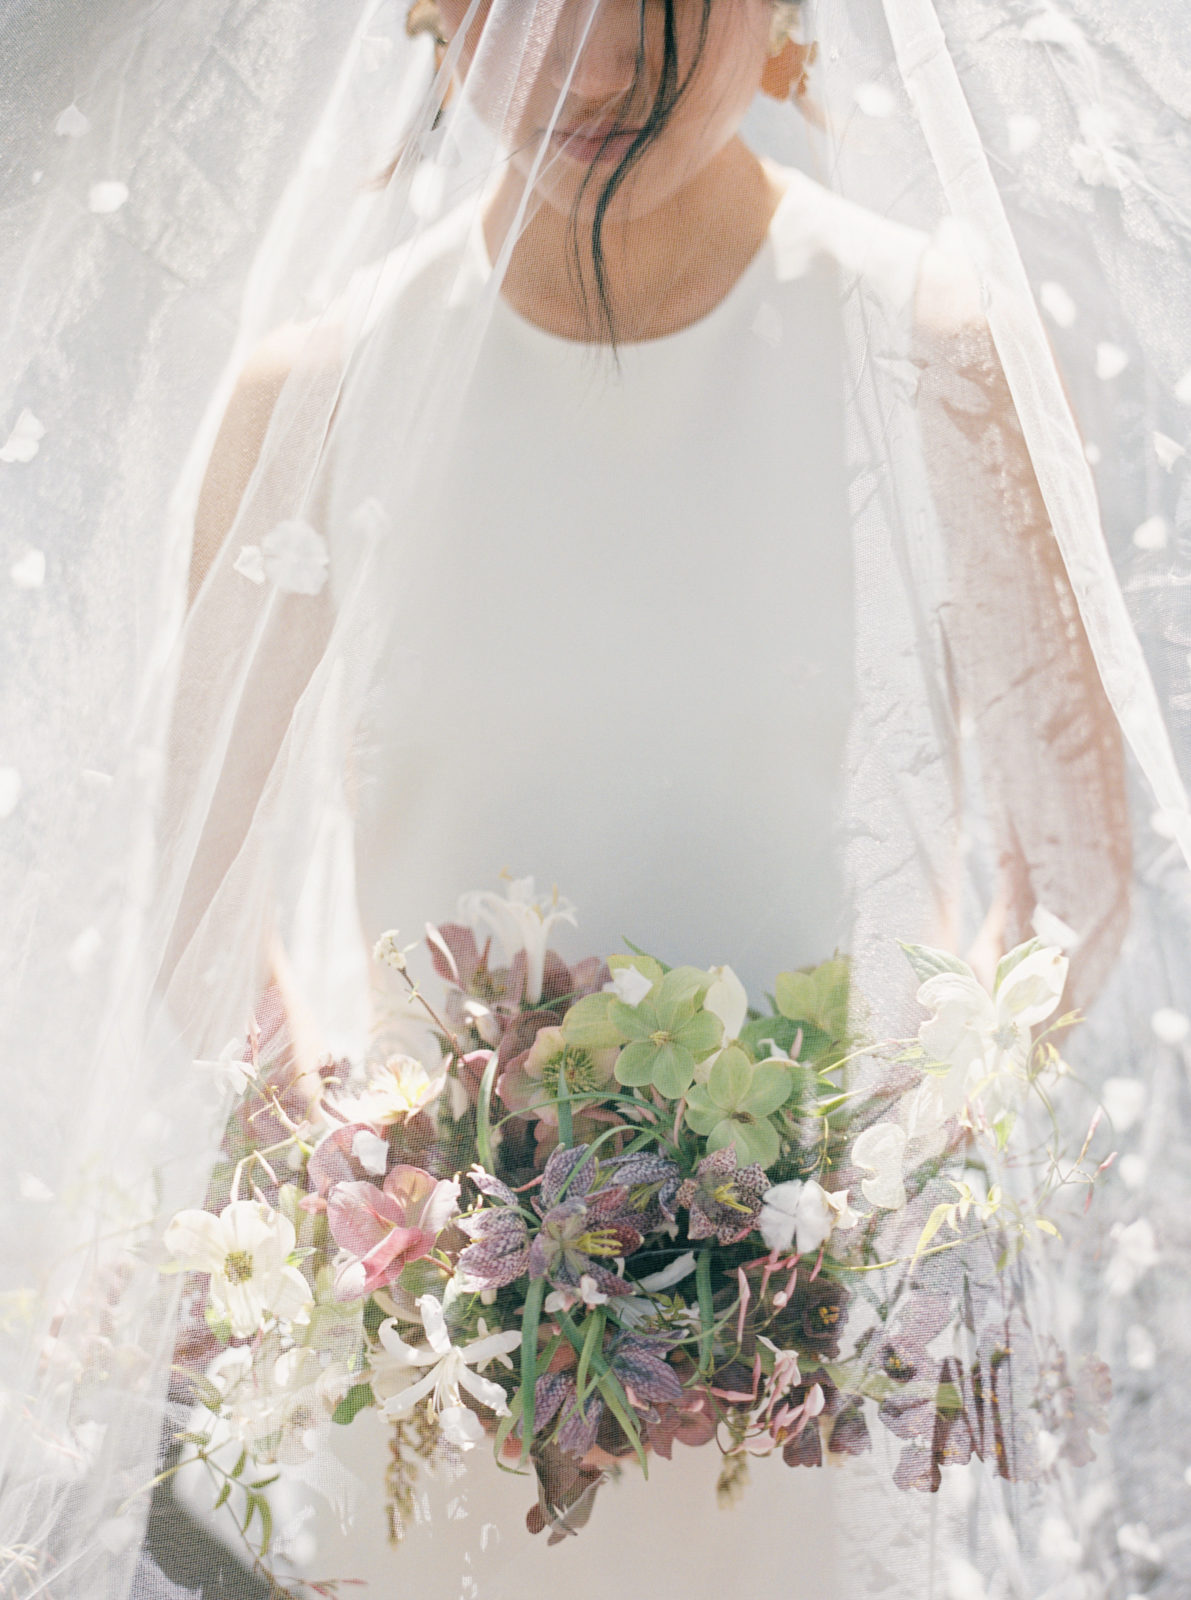 Bride wears floral applique veil over her face and bouquet while drenched in sunlight. Old world-inspired elopement.